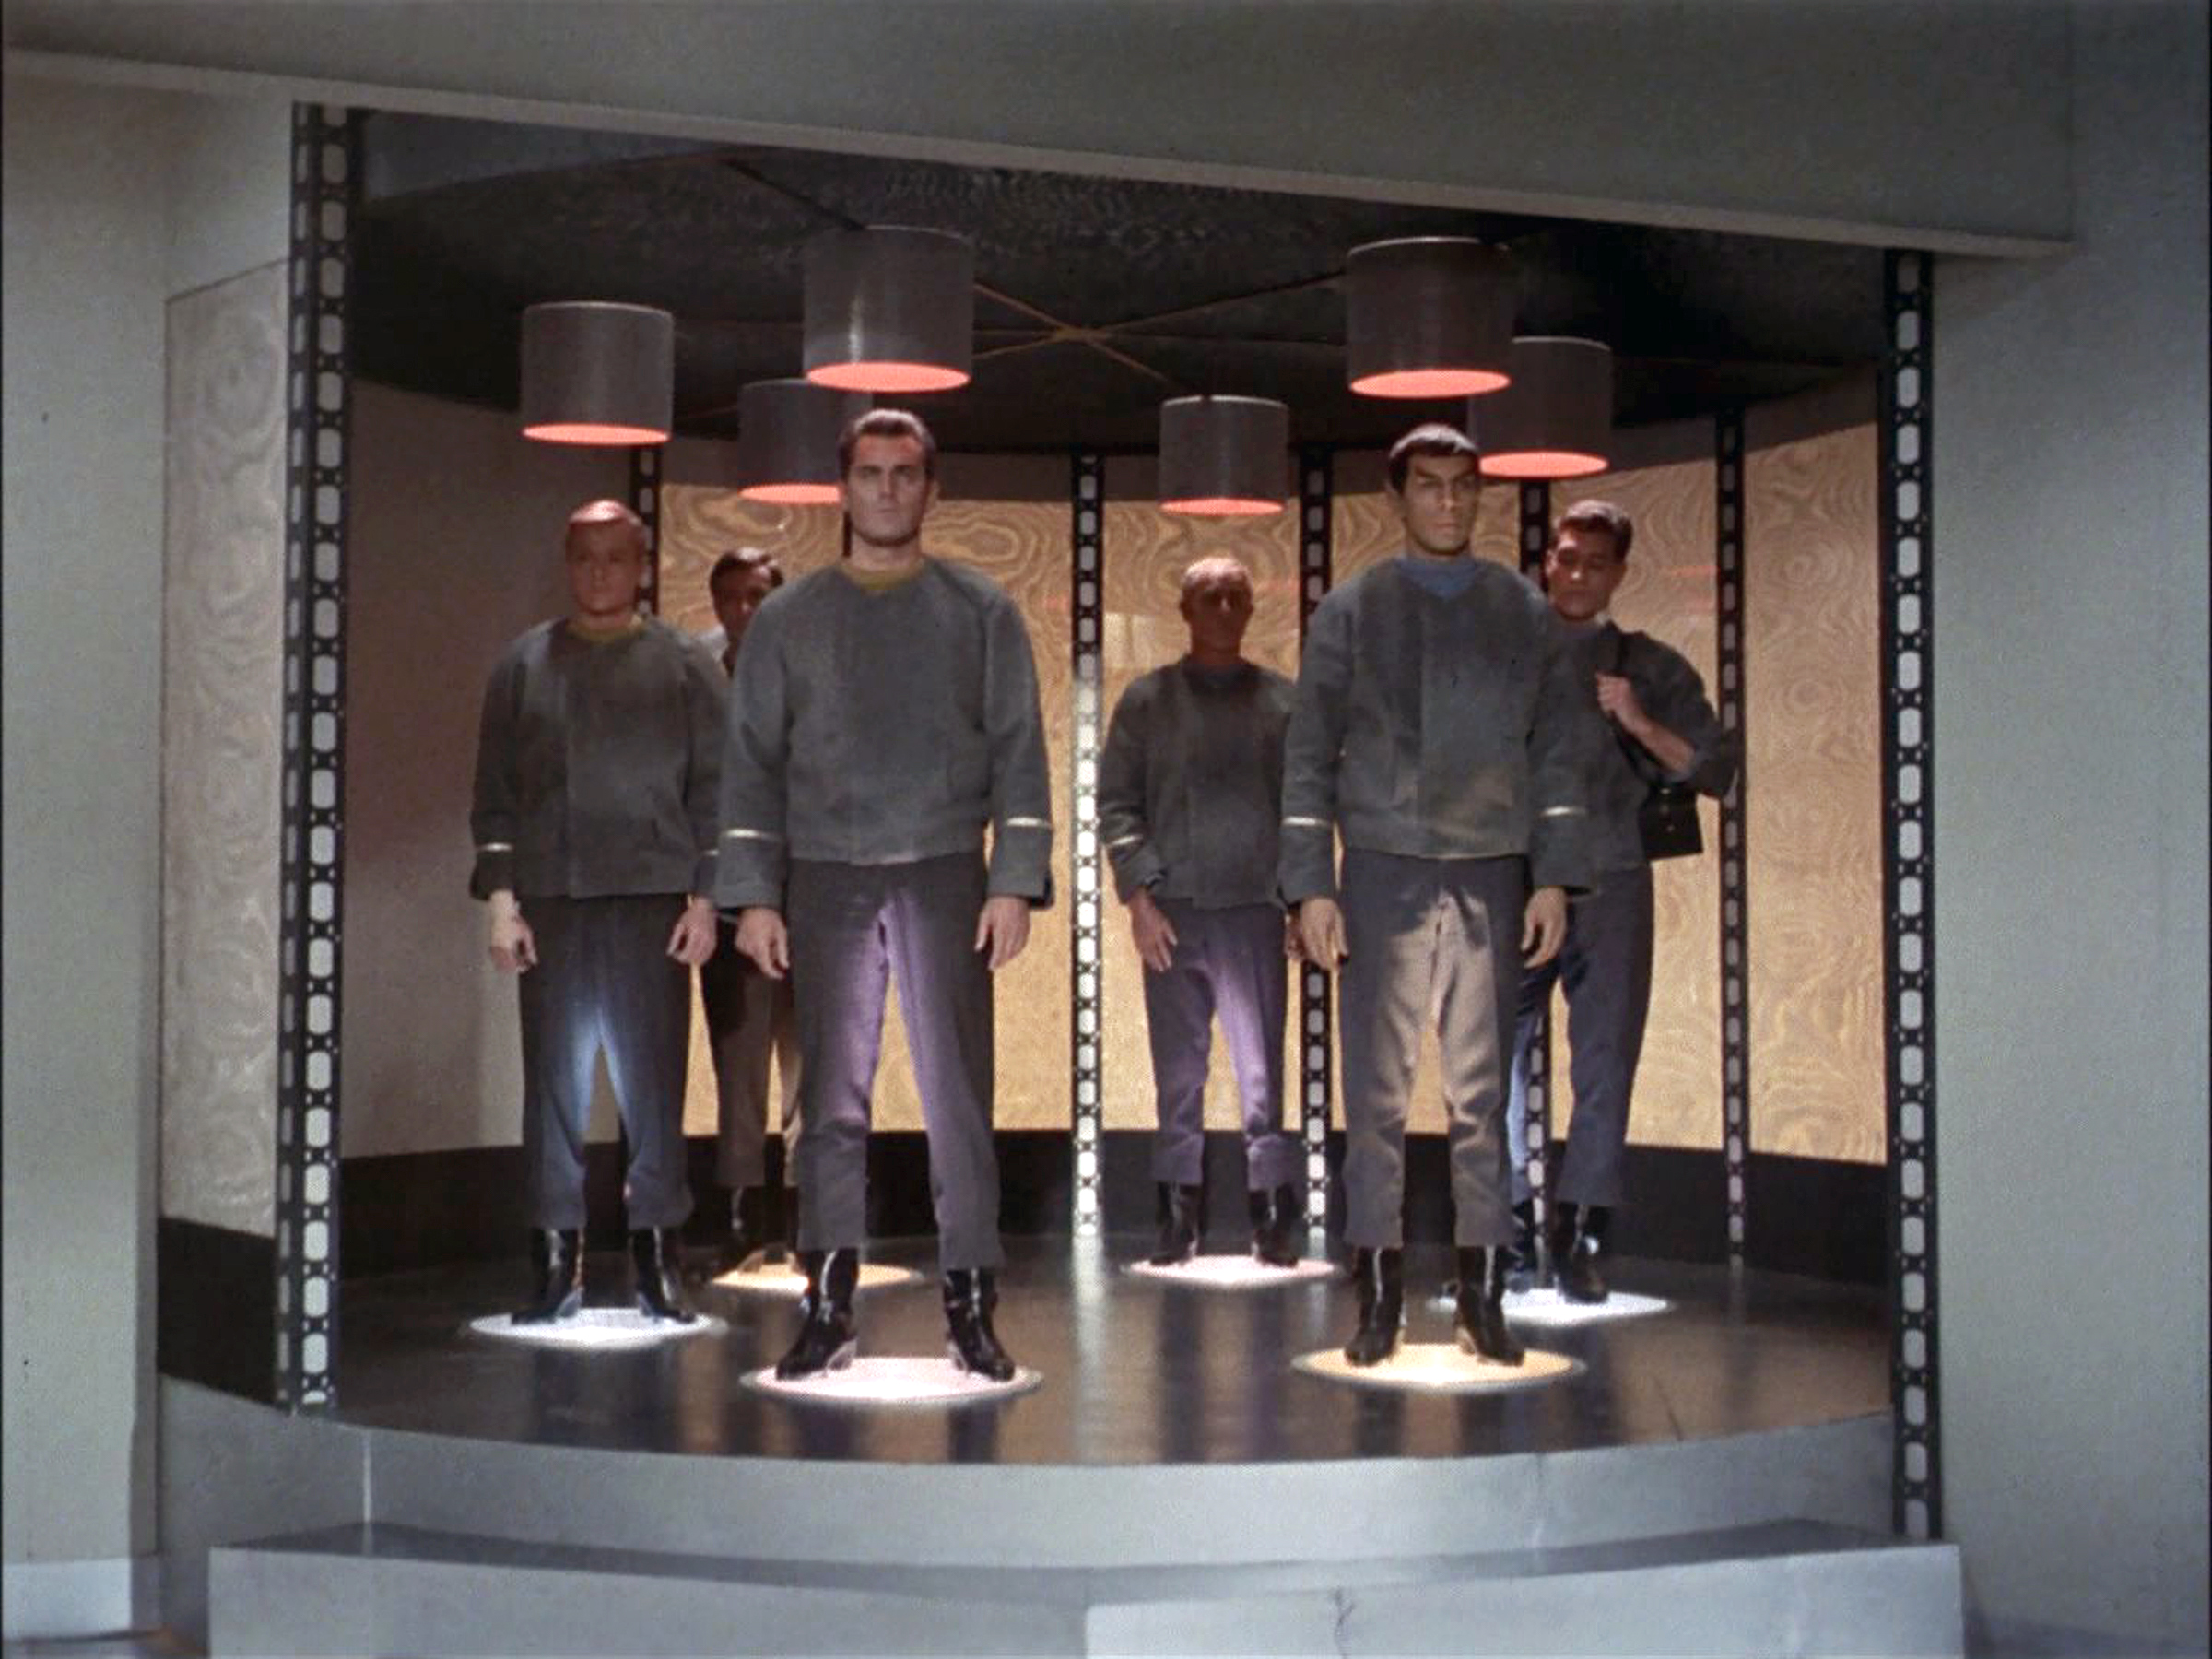 The crew of the USS Enterprise being transported. From left: Peter Duryea as Lieutenant José Tyler, Adam Roarke as Communications Officer Garison, Jeffrey Hunter as Captain Christopher Pike, John Hoyt as Dr. Phillip Boyce, Leonard Nimoy as Mr. Spock and Ed Madden as the Enterprise Geologist.